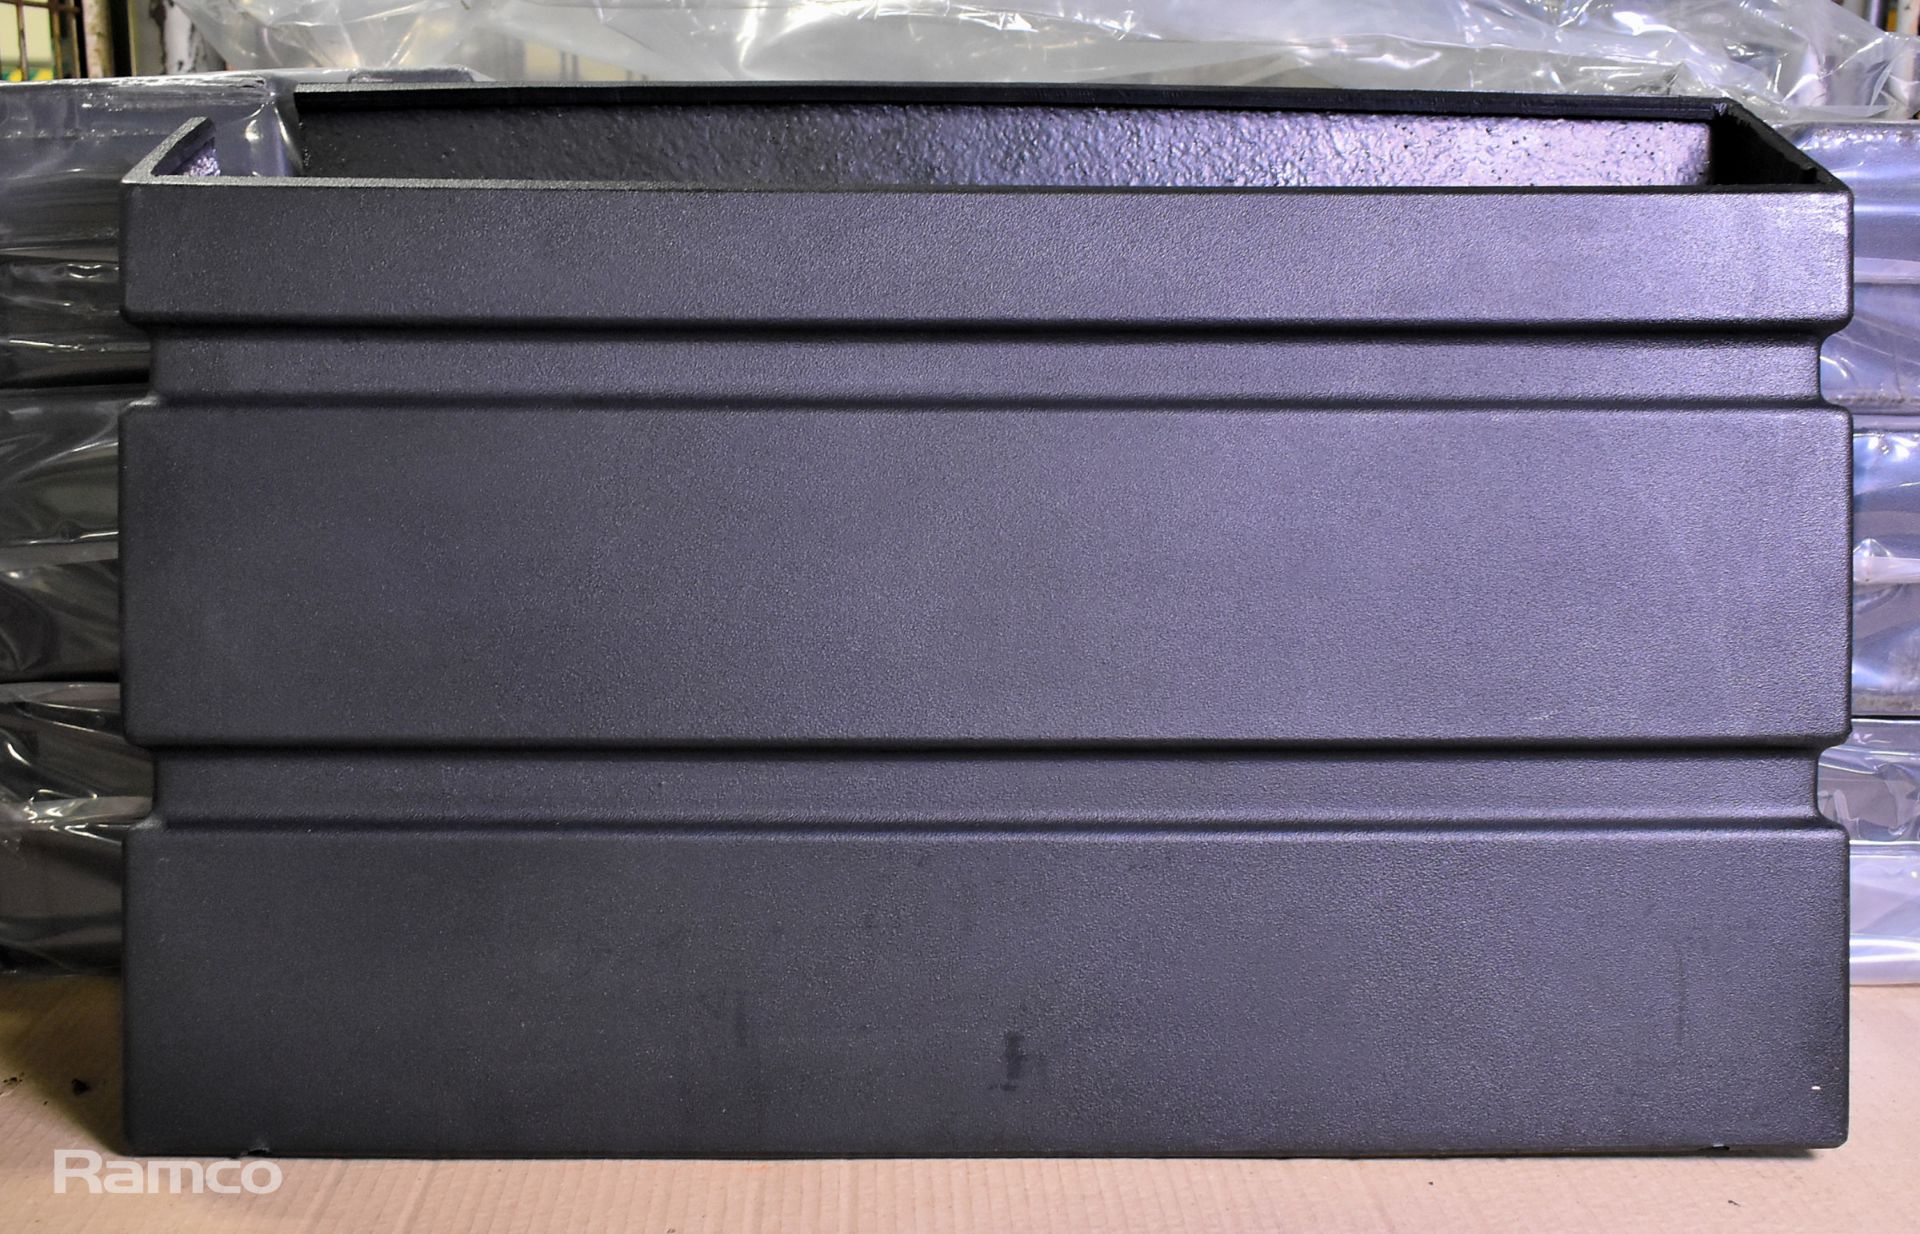 Vehicle parts - plastic storage box, grille front, flyscreen - Image 11 of 12